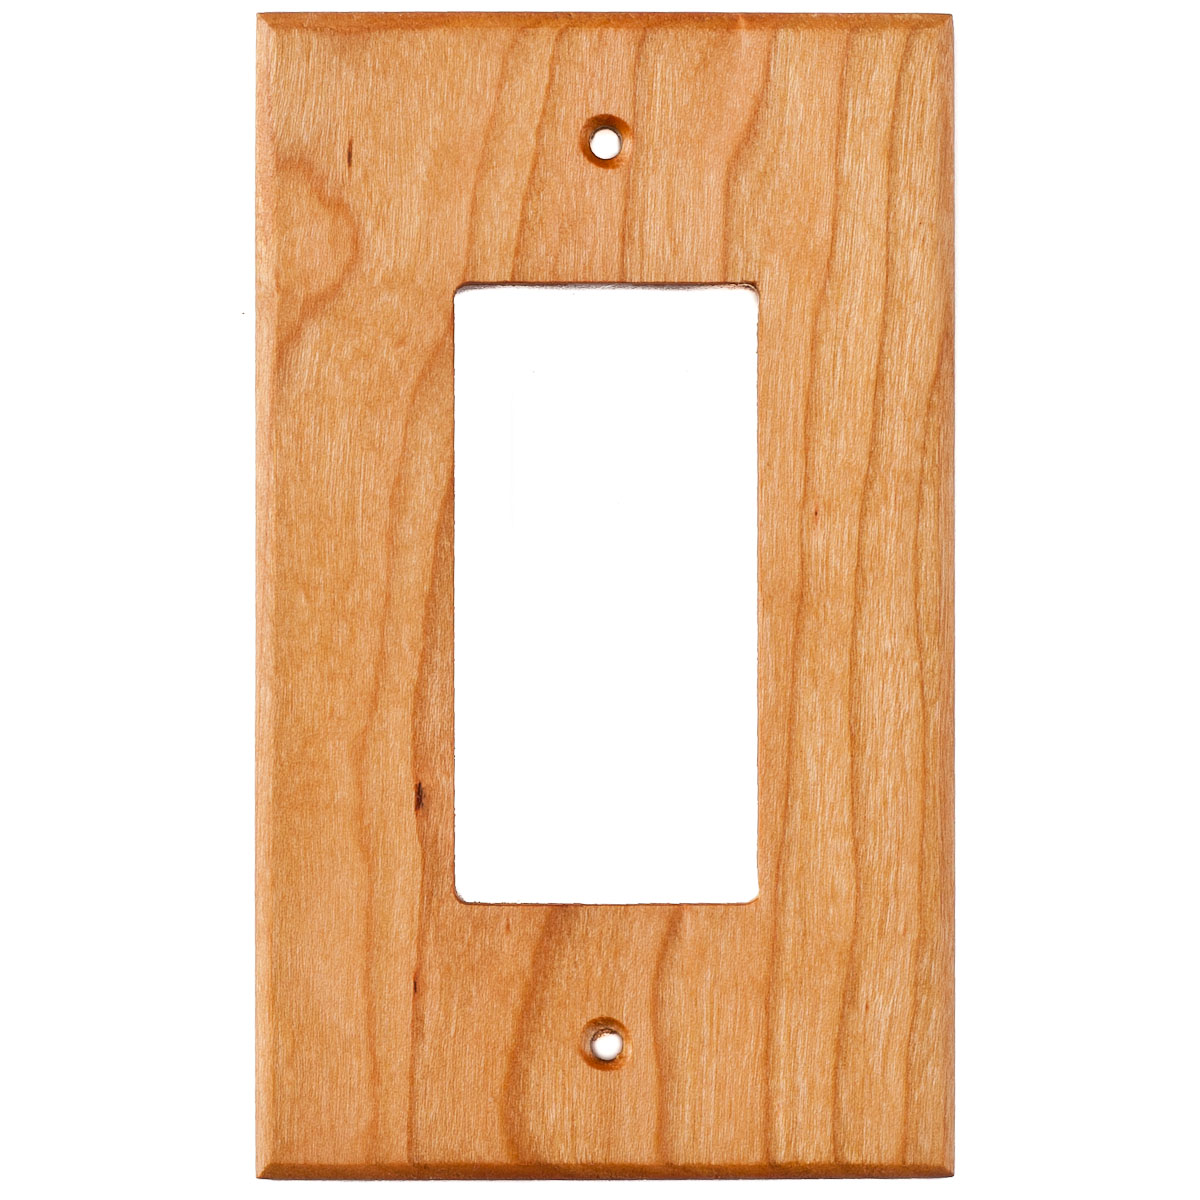 Maple Wood Wall Plate - 2 Gang Duplex Outlet Cover - Virgin Timber Lumber